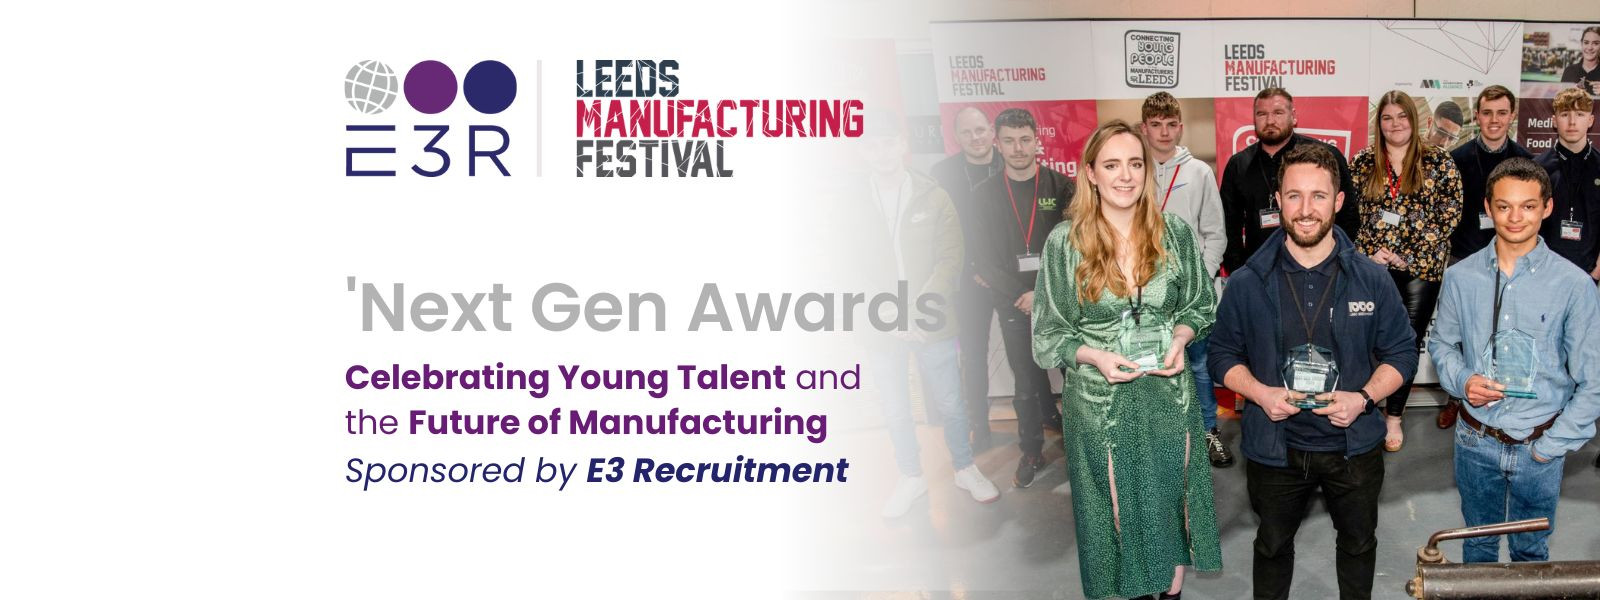 E3 Recruitment Sponsors Next Gen Awards at Leeds Manufacturing Festival to Celebrate and Recognise Future Leaders in Engineering and Manufacturing